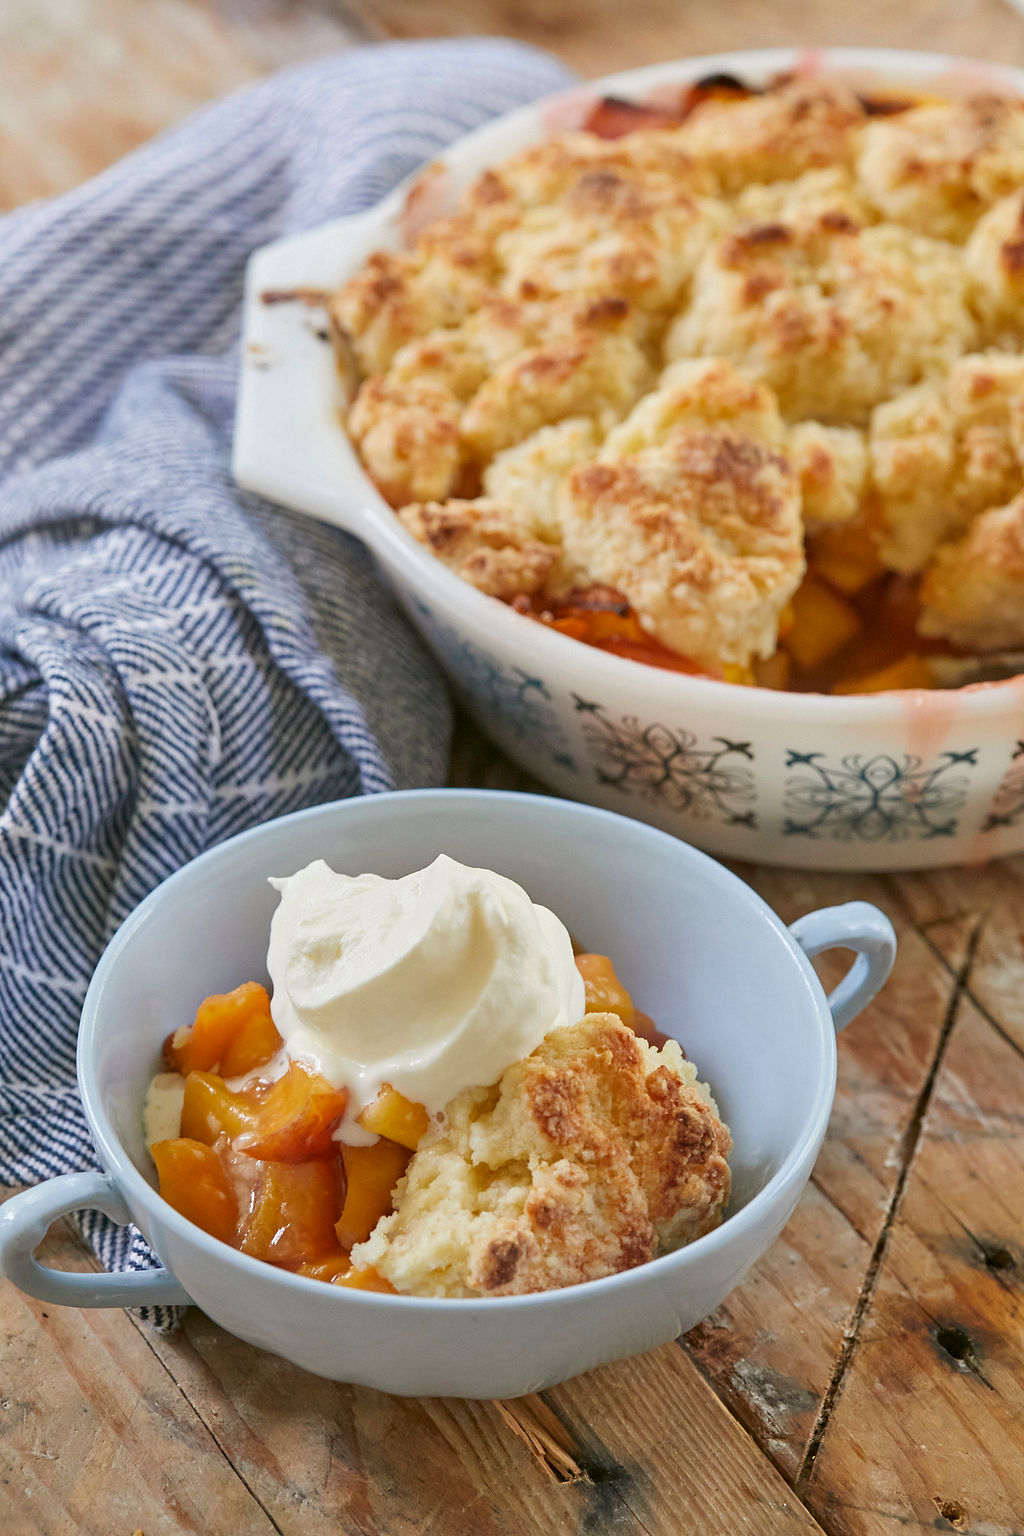 A serving of my Best Peach Cobbler recipe, topped with whipped cream, and ready to eat.